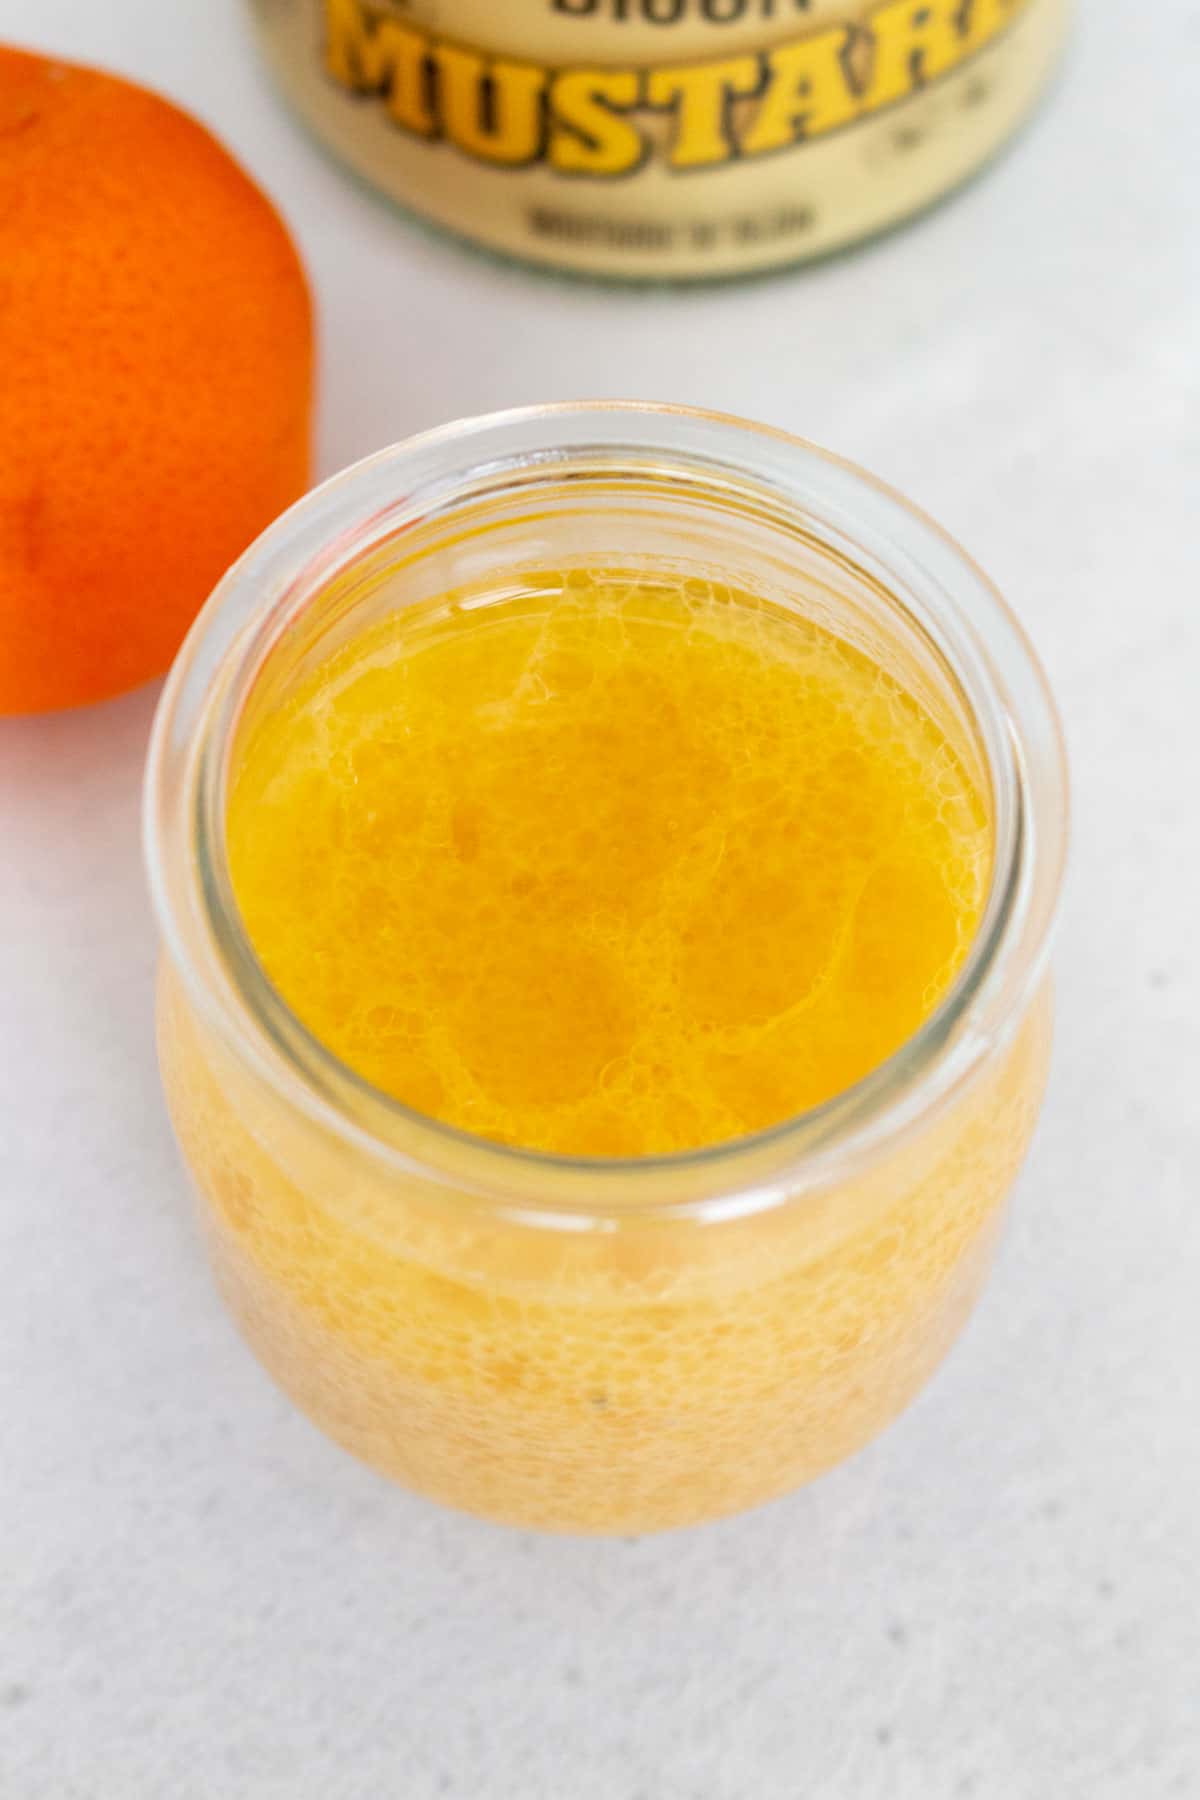 Angled view of a jar of orange mustard dressing.